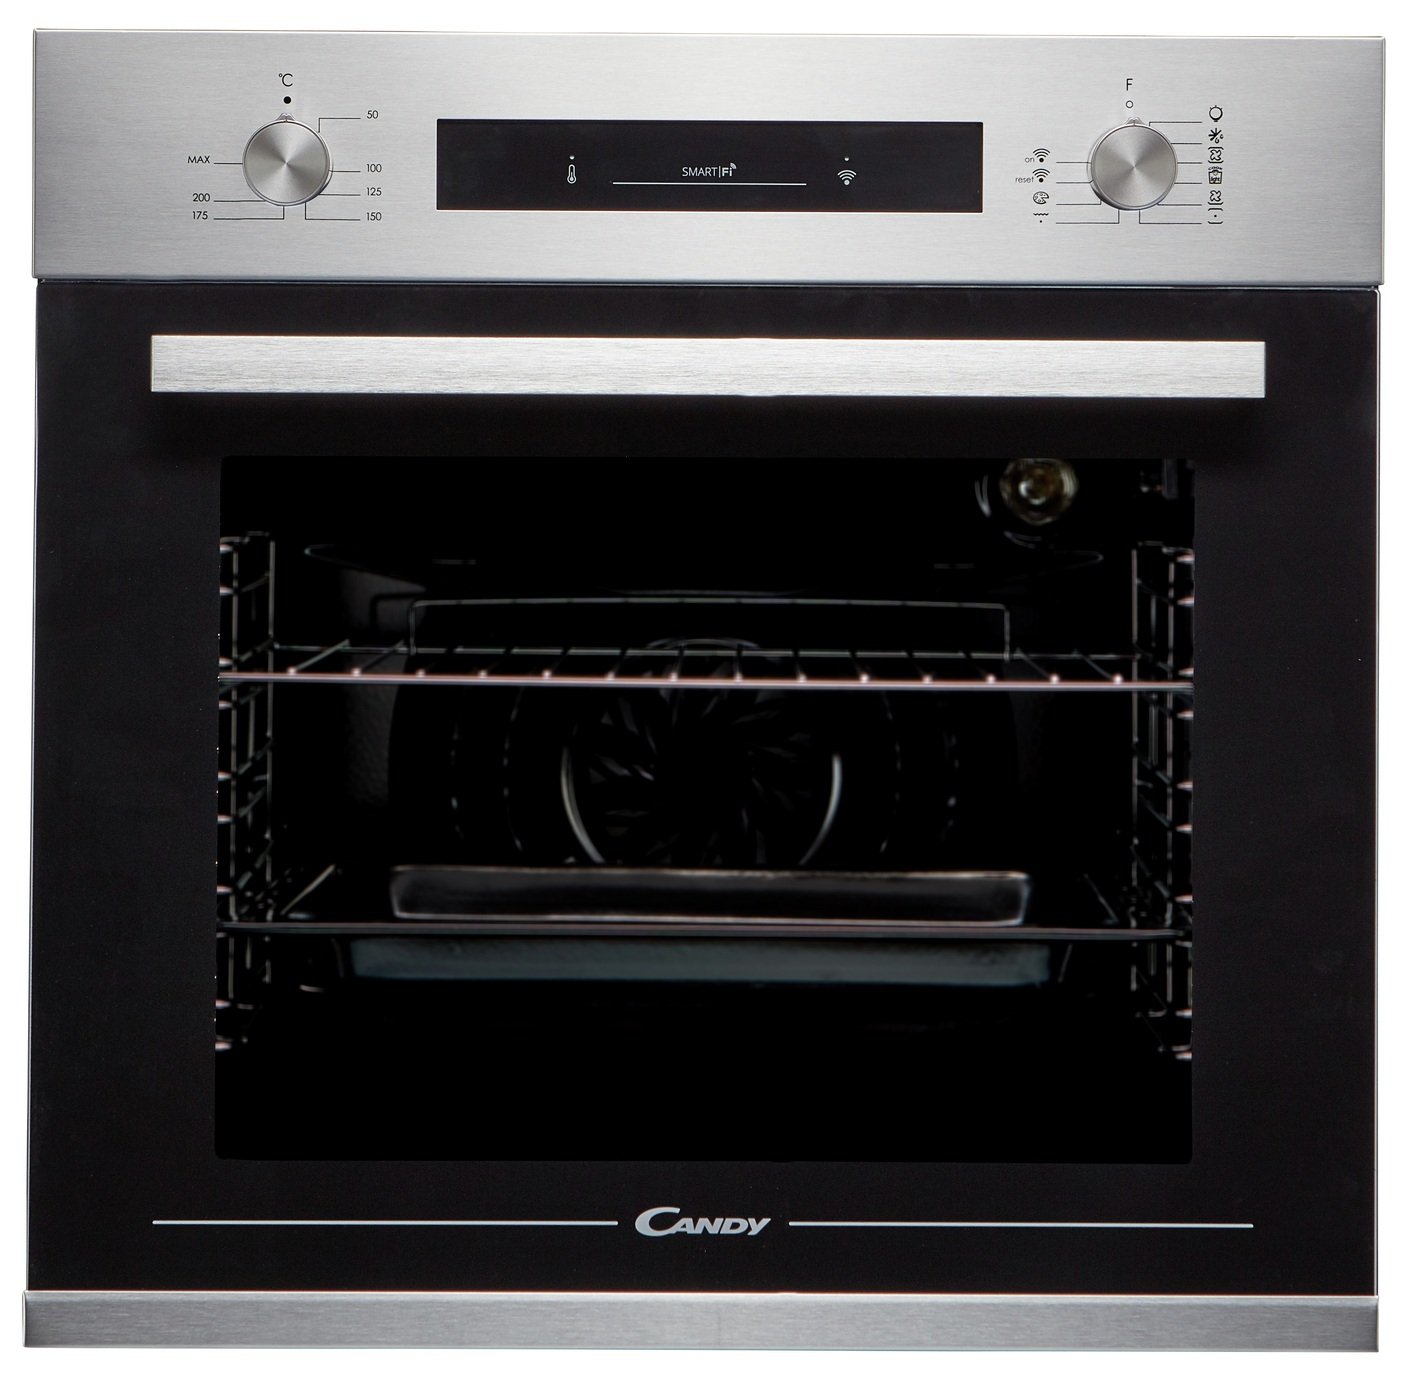 Candy FCP602X/E Single WIFI Oven - Stainless Steel